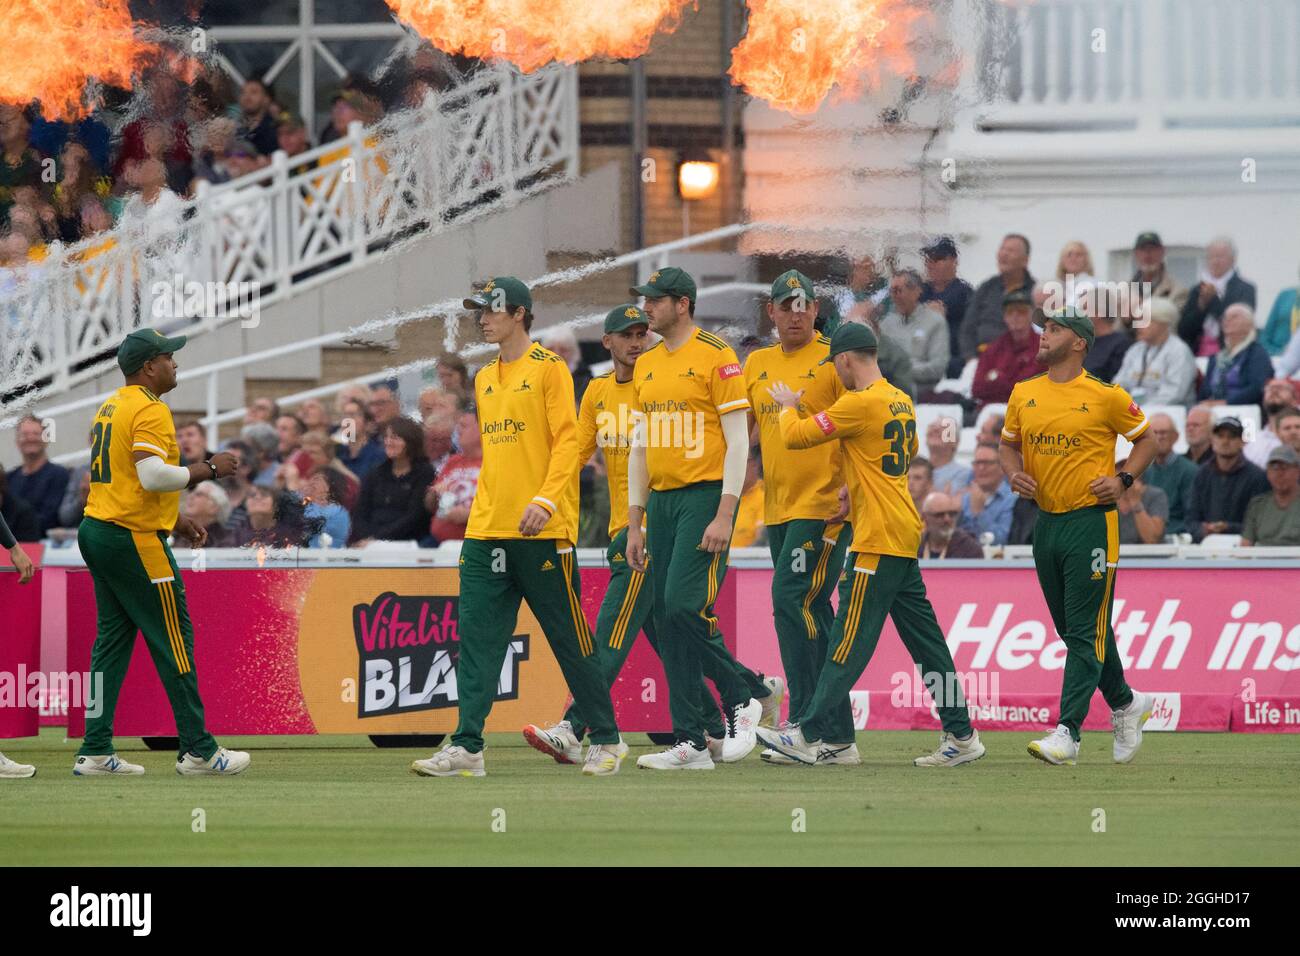 Vitality Blast T20 Quarter Finals, Notts Outlaws against Hampshire Hawks at the Trent Bridge cricket ground. Stock Photo